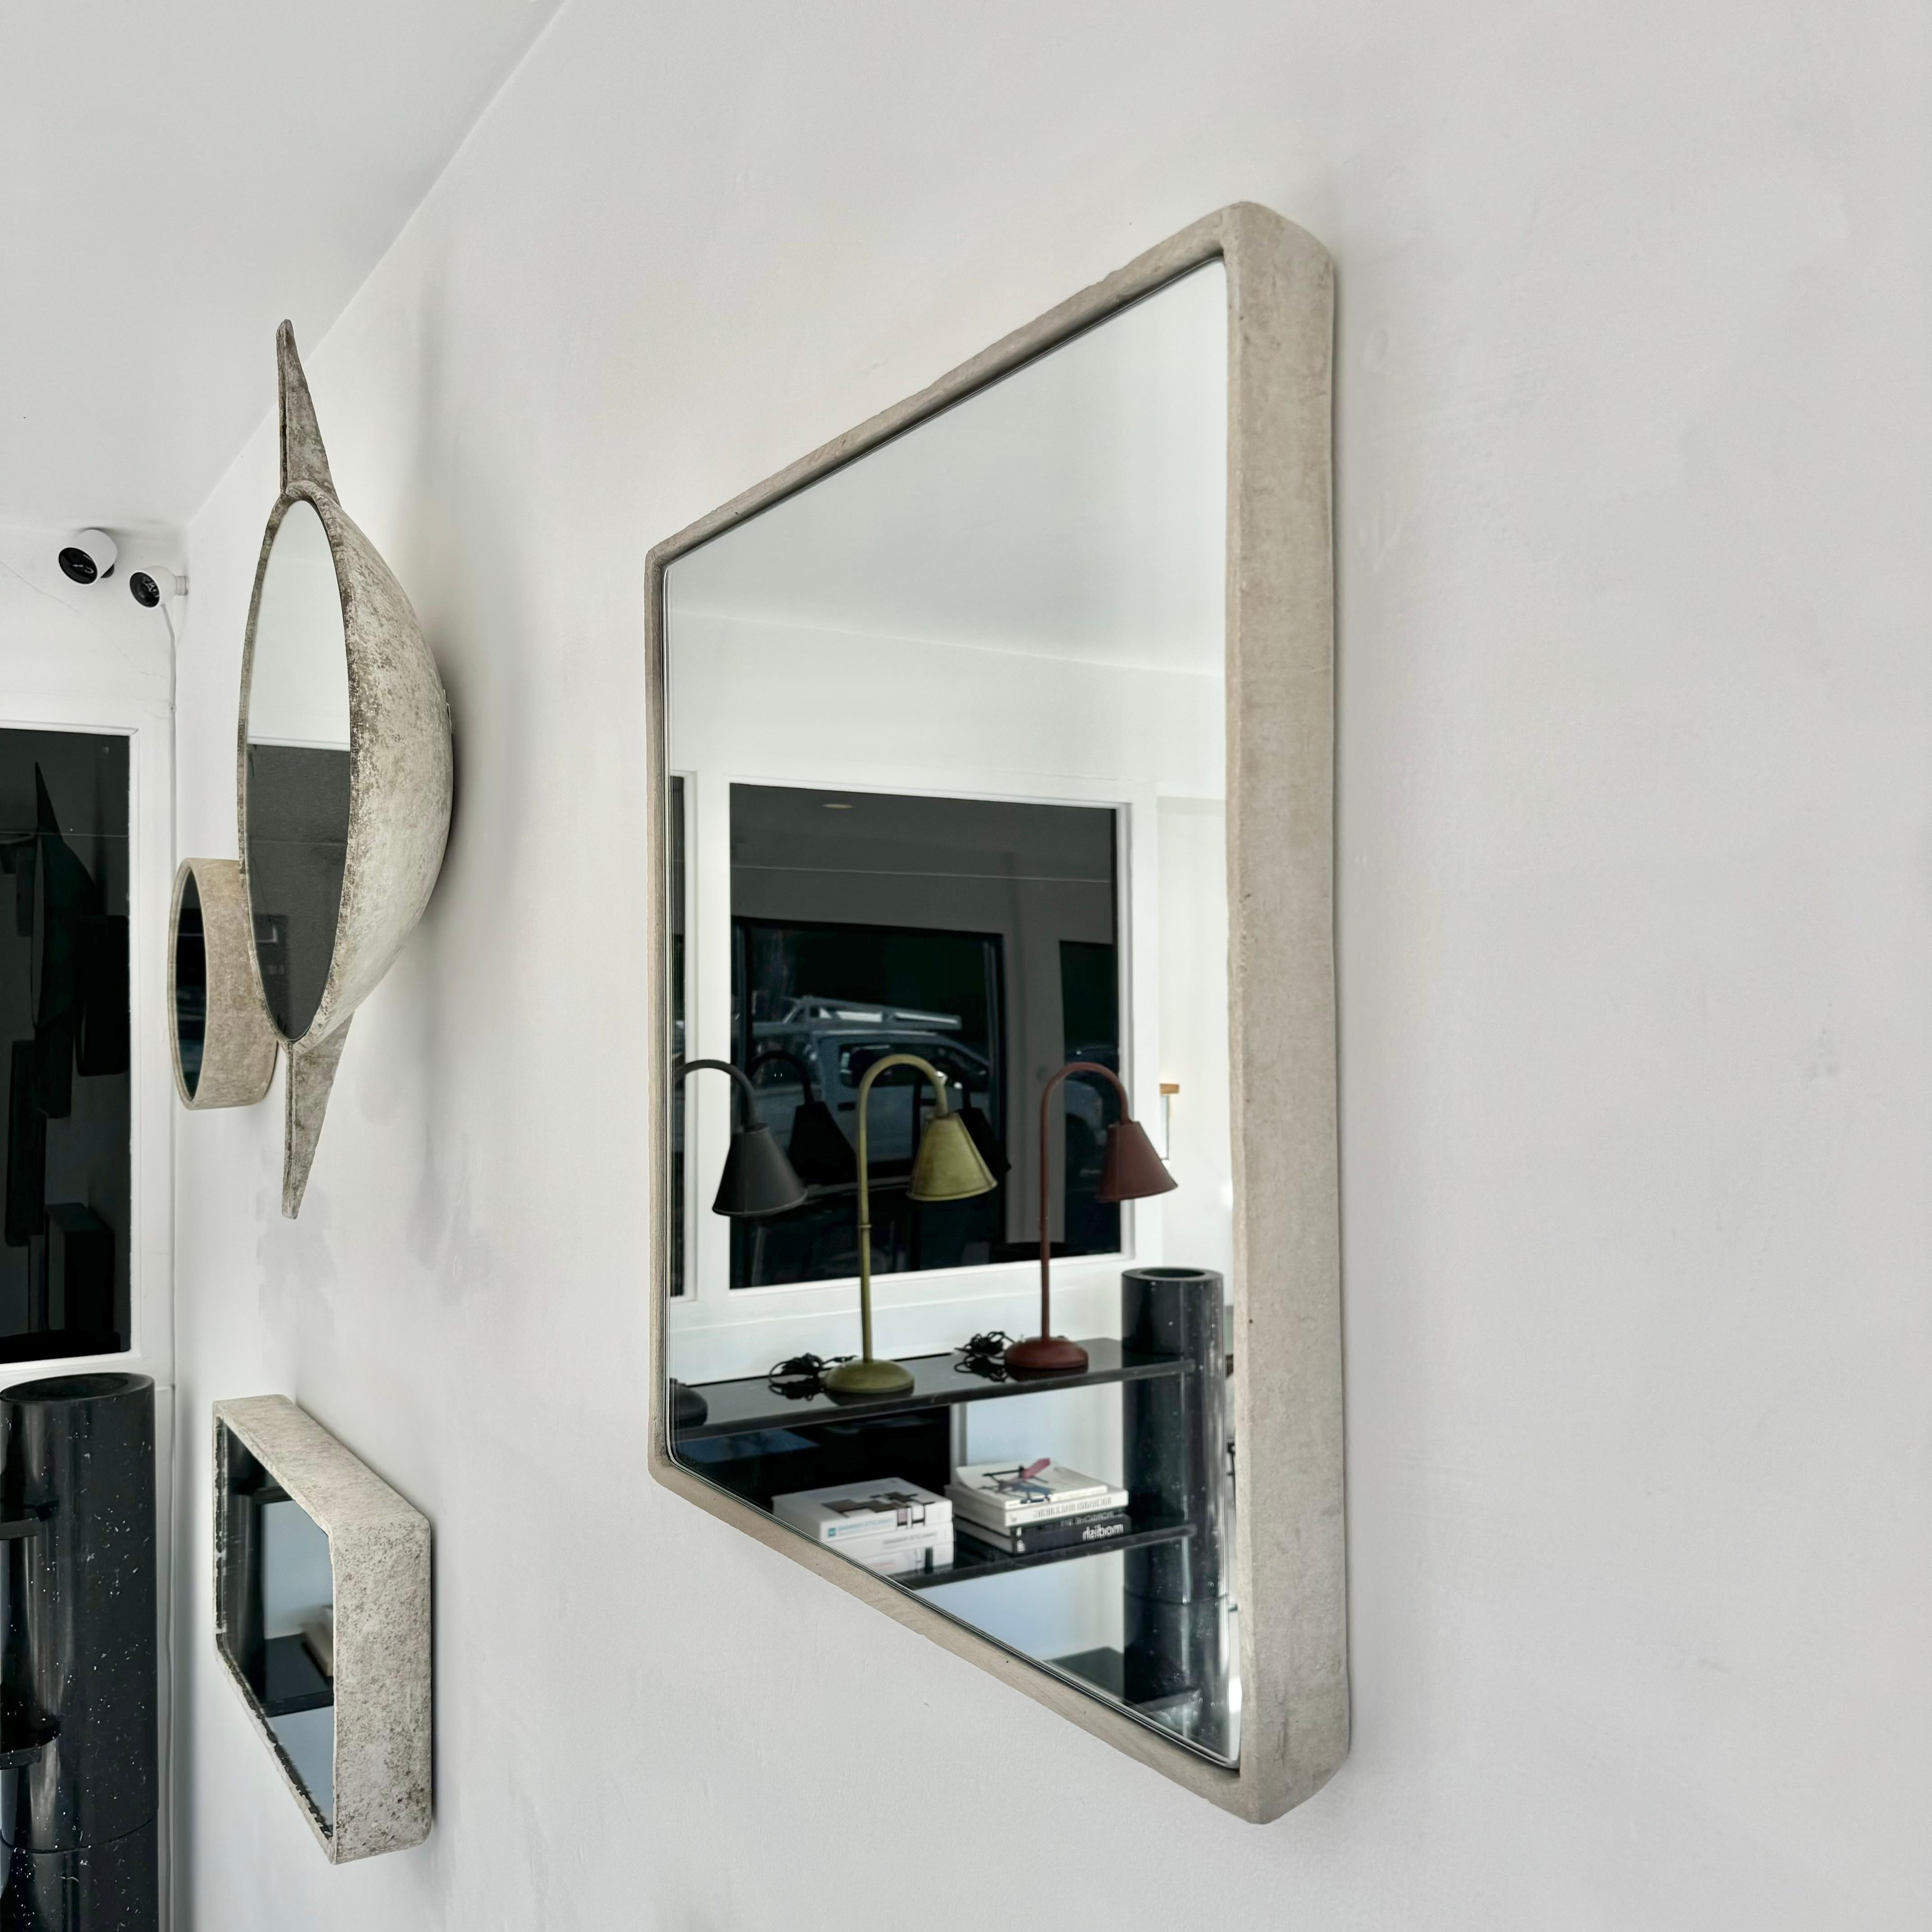 Large Square Willy Guhl Concrete Mirror, 1960s Switzerland For Sale 1